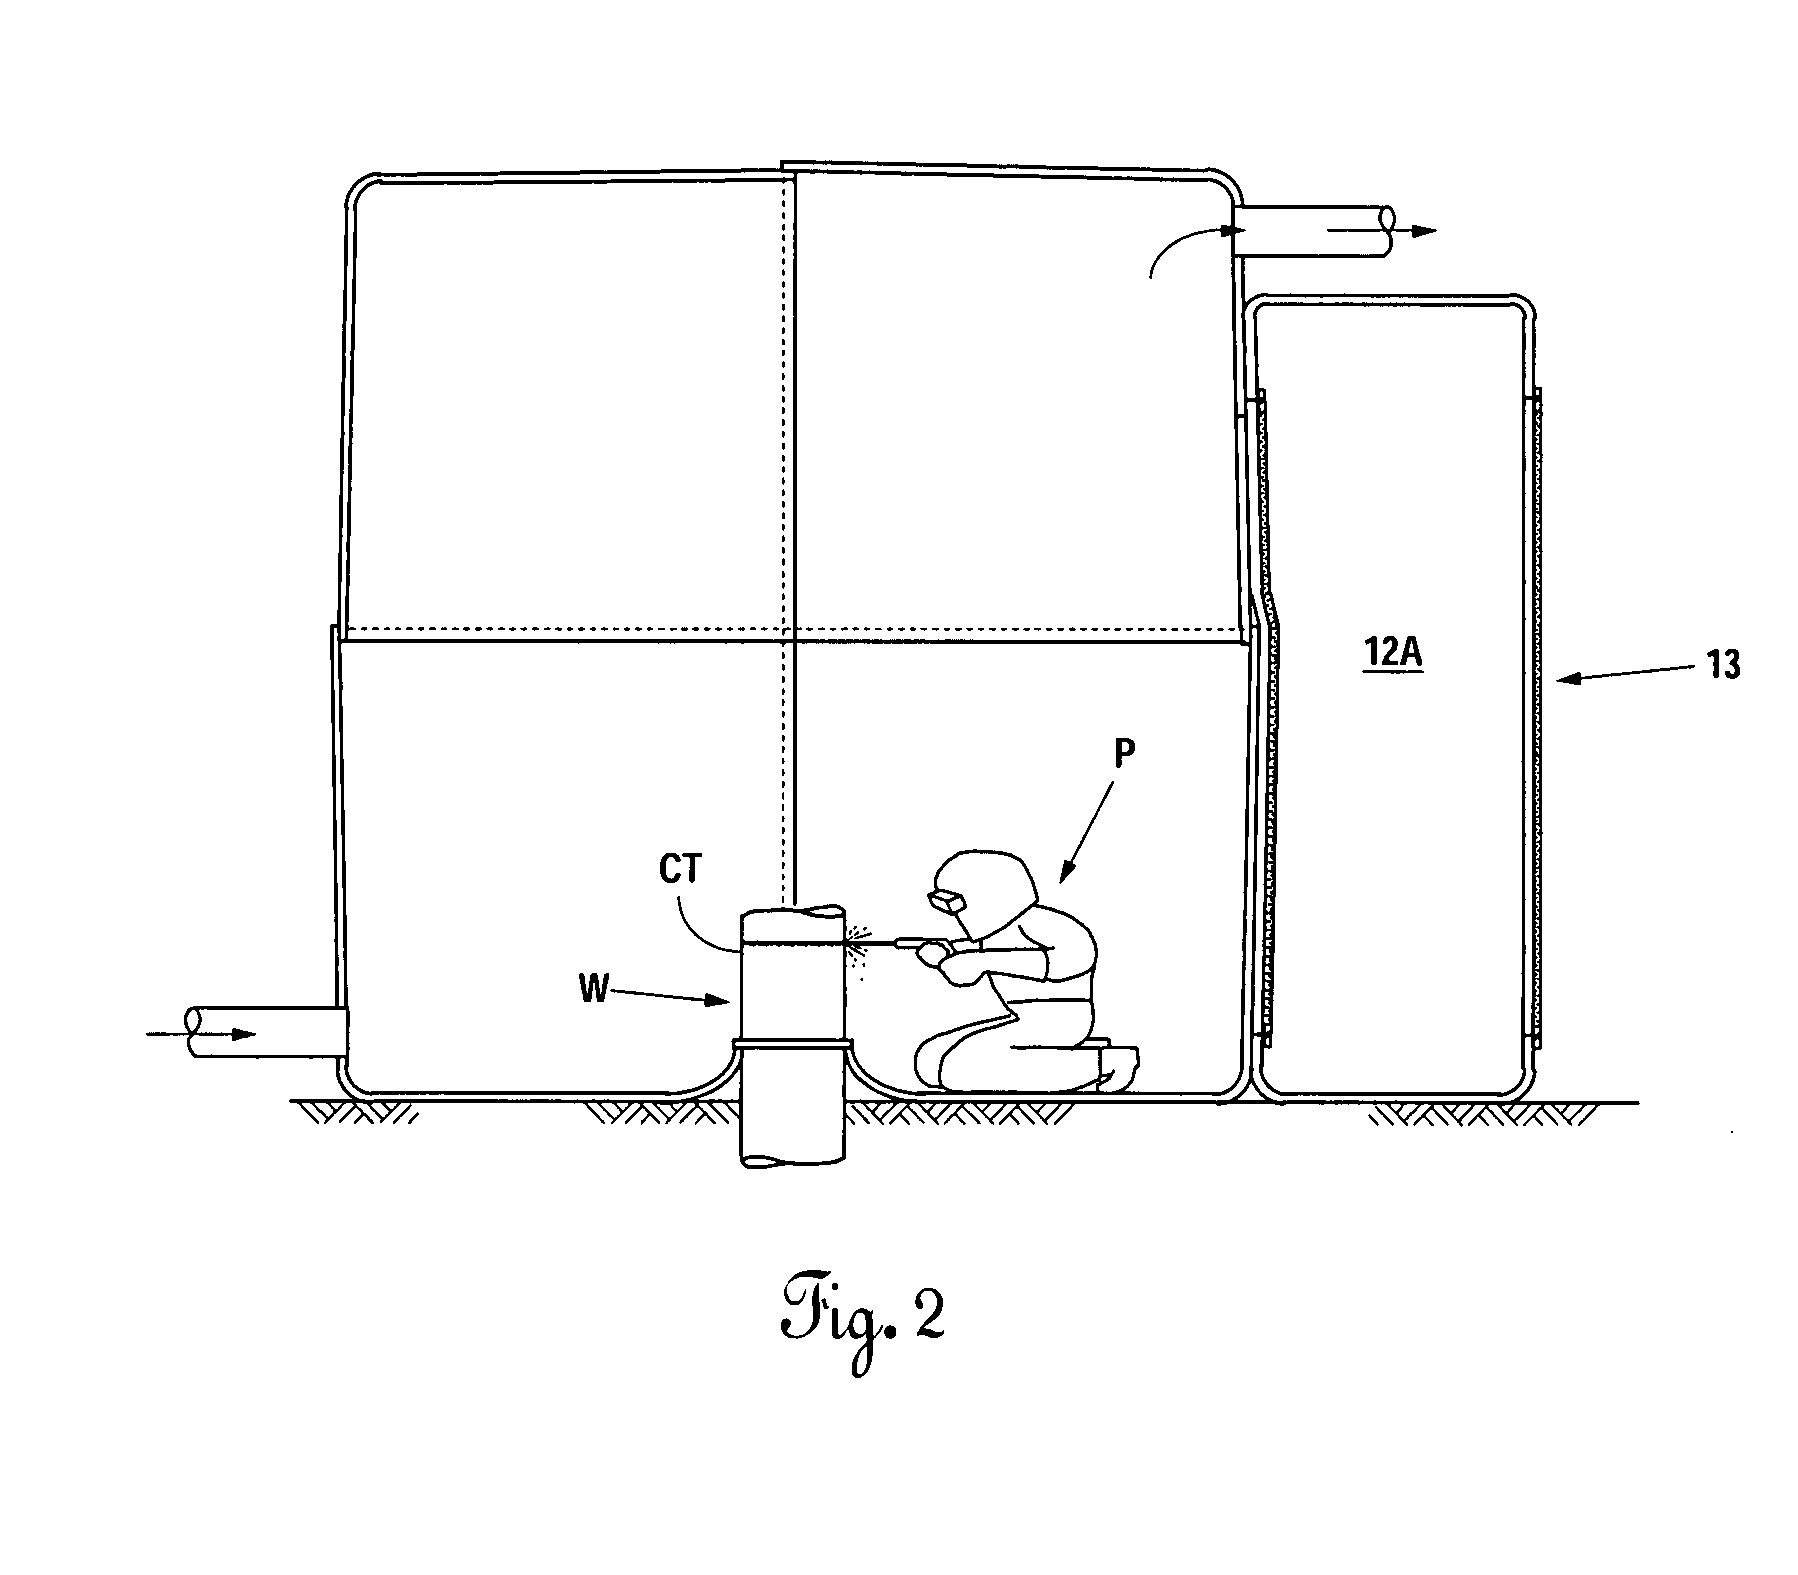 Modular welding or like operation conduit enclosure abstract of the disclosure